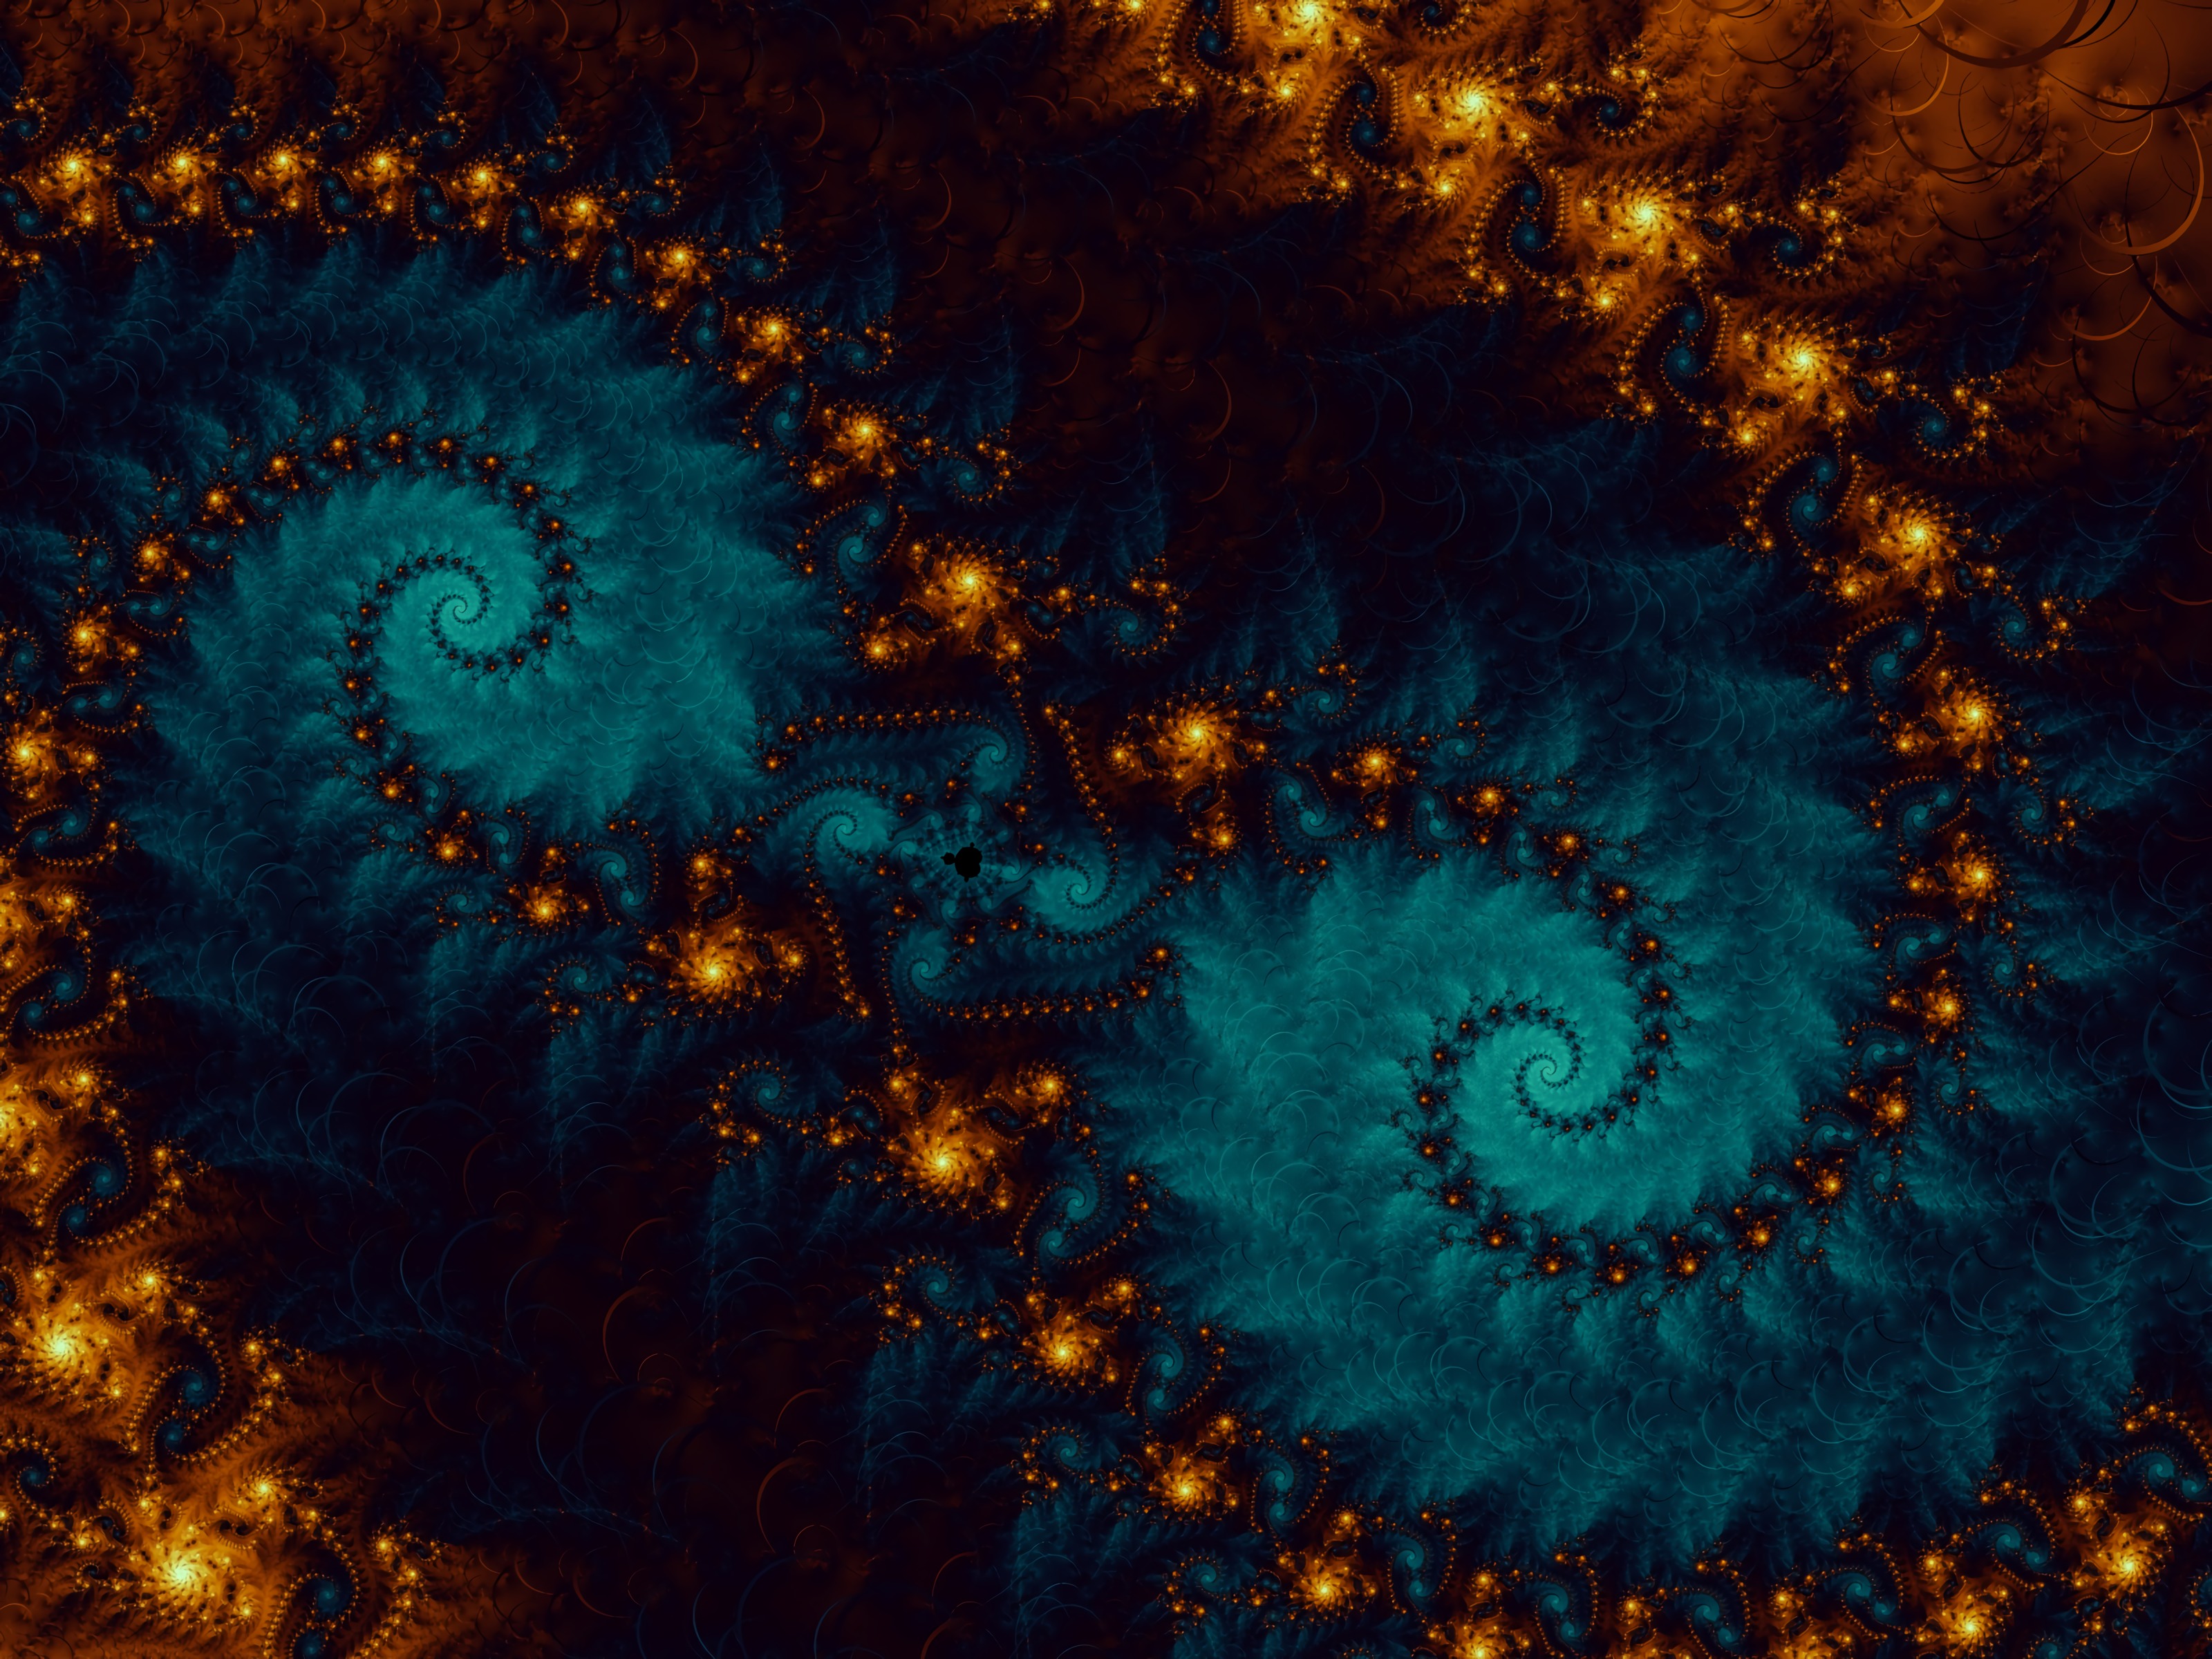 fractal, abstract, pattern, spiral, swirling, involute Full HD